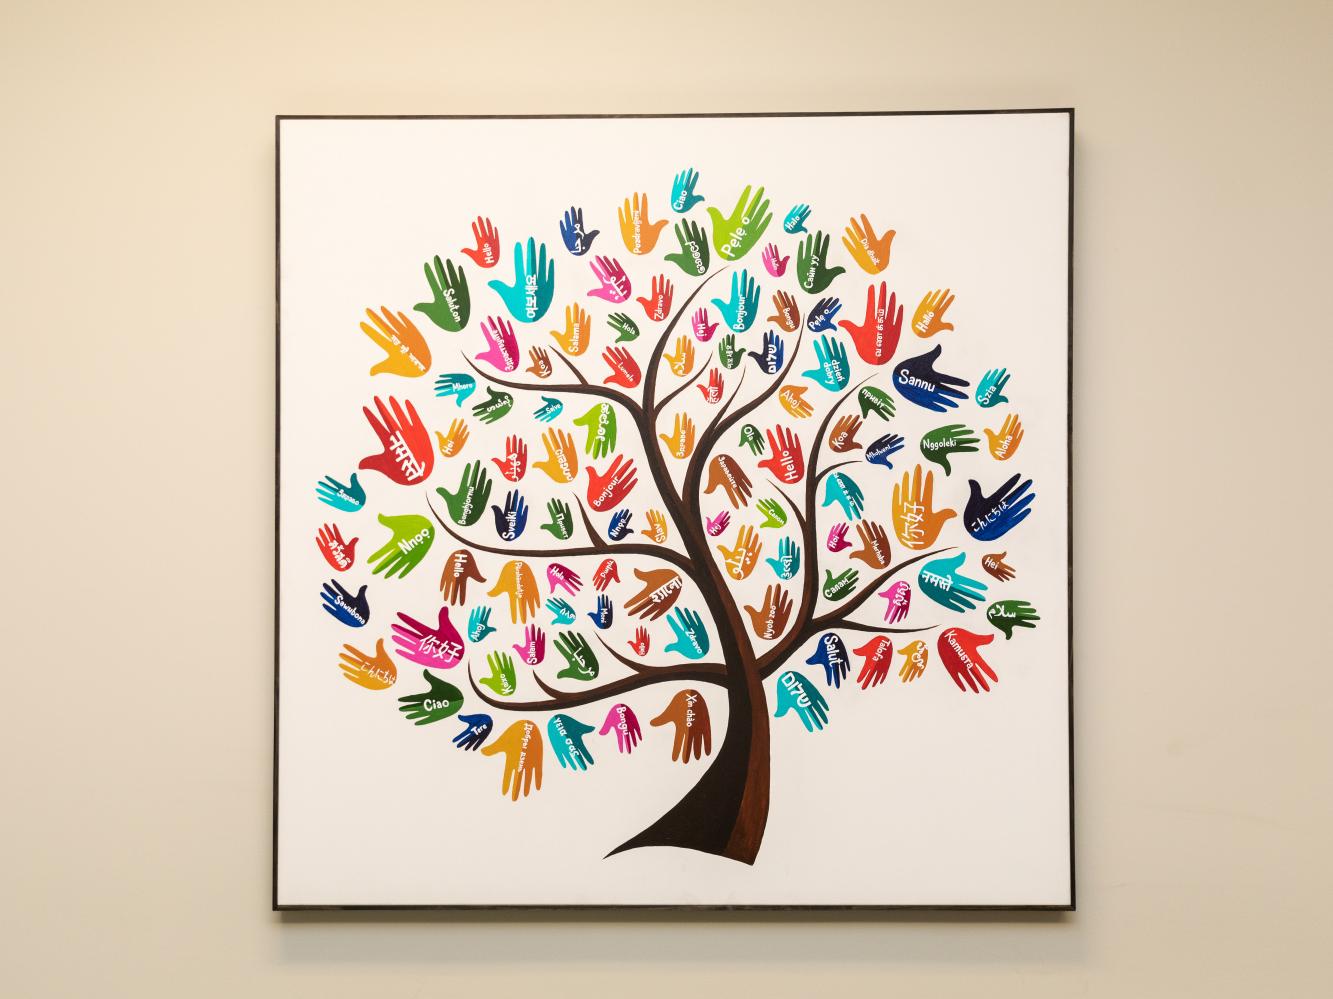 Painting of tree with the word "hello" in various languages as leaves